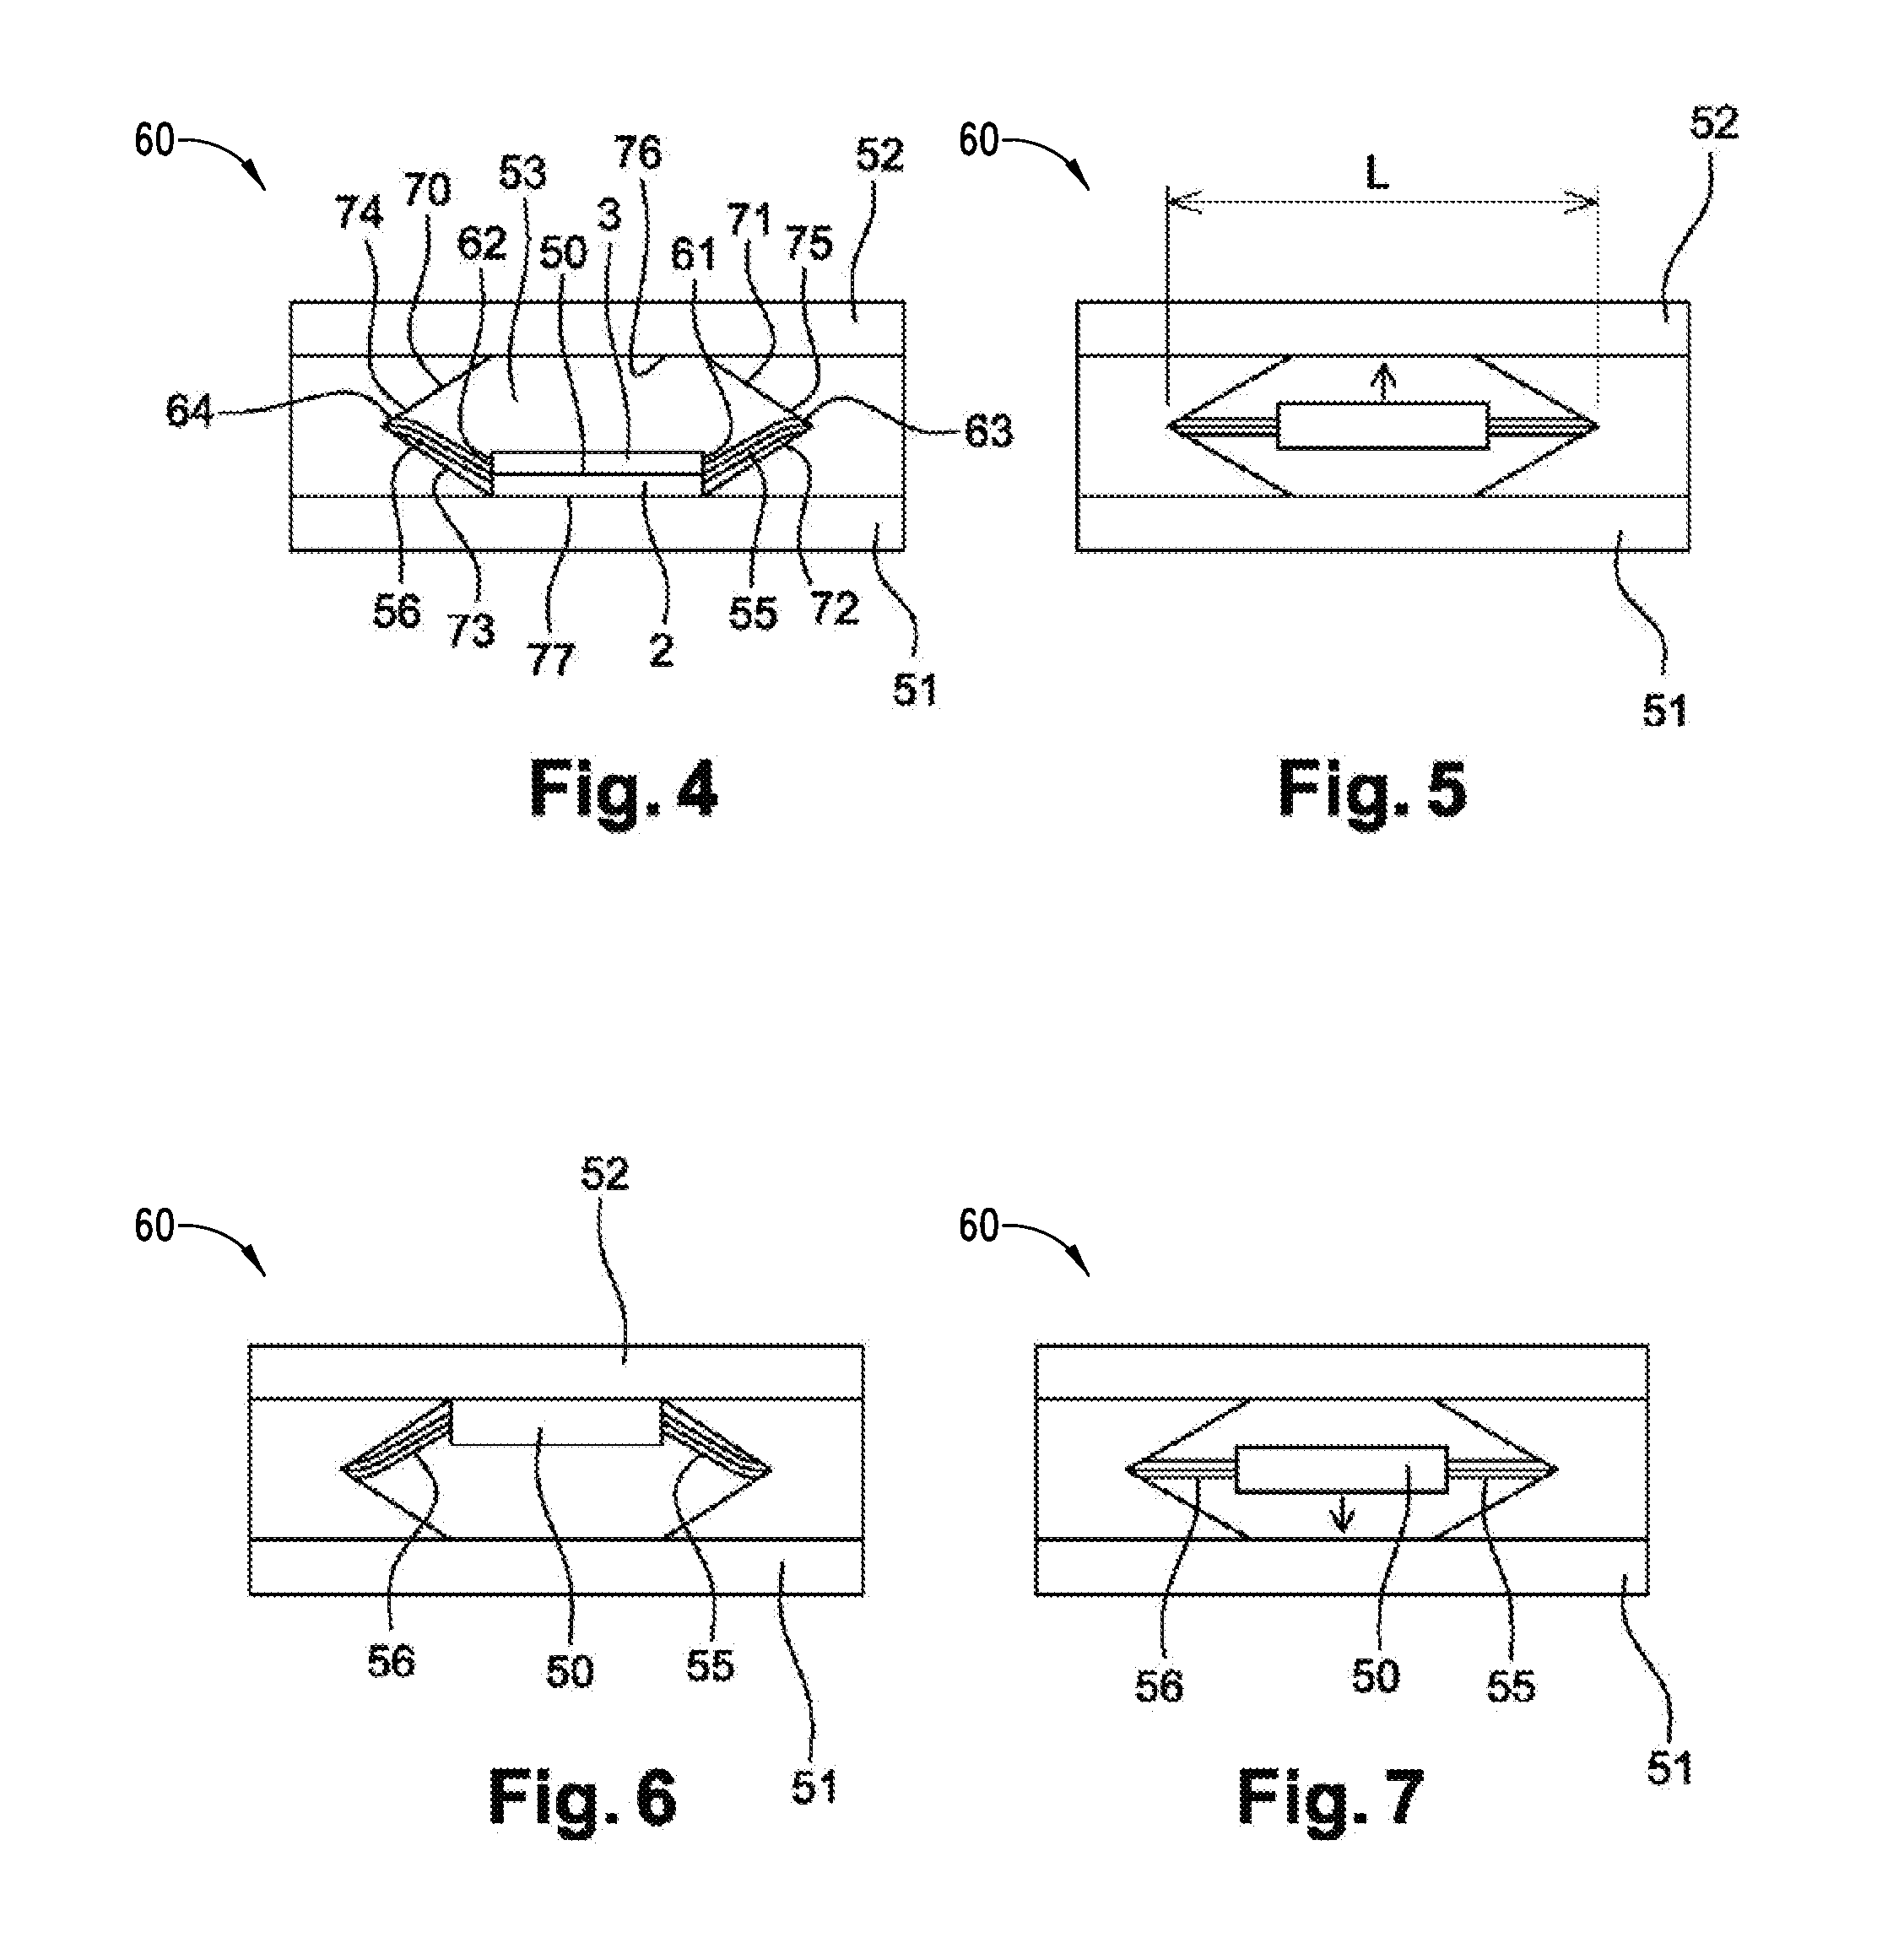 Electrical energy generation device